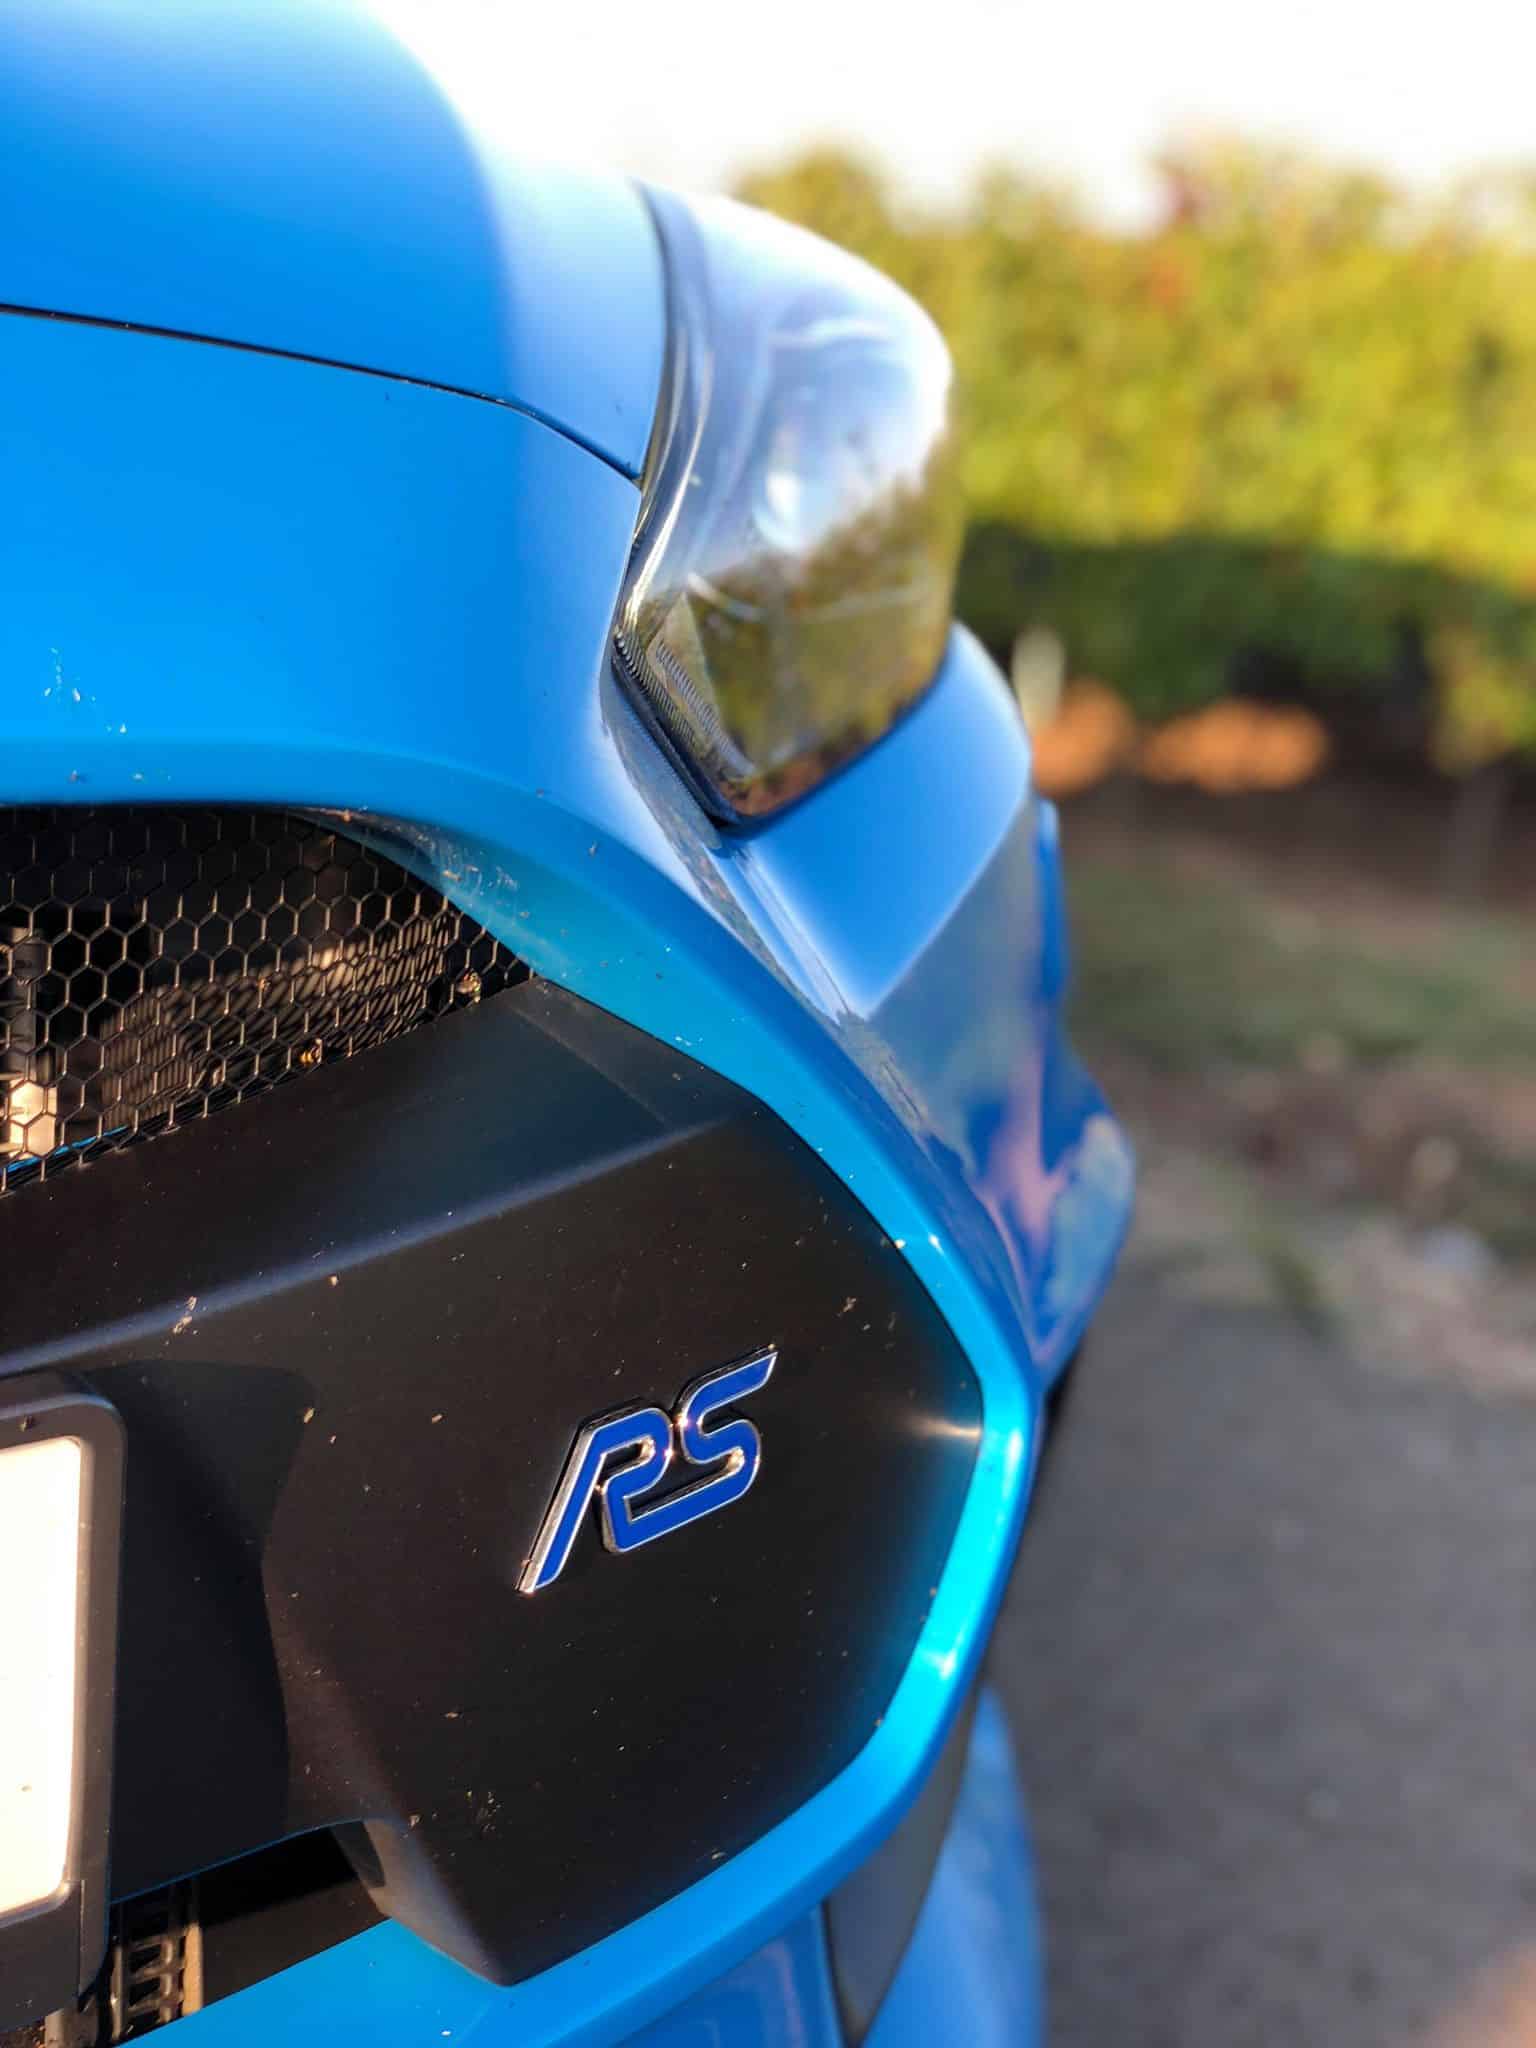 Test drive Ford Focus RS - Superhatch // Turatii Scrise // Blog Auto